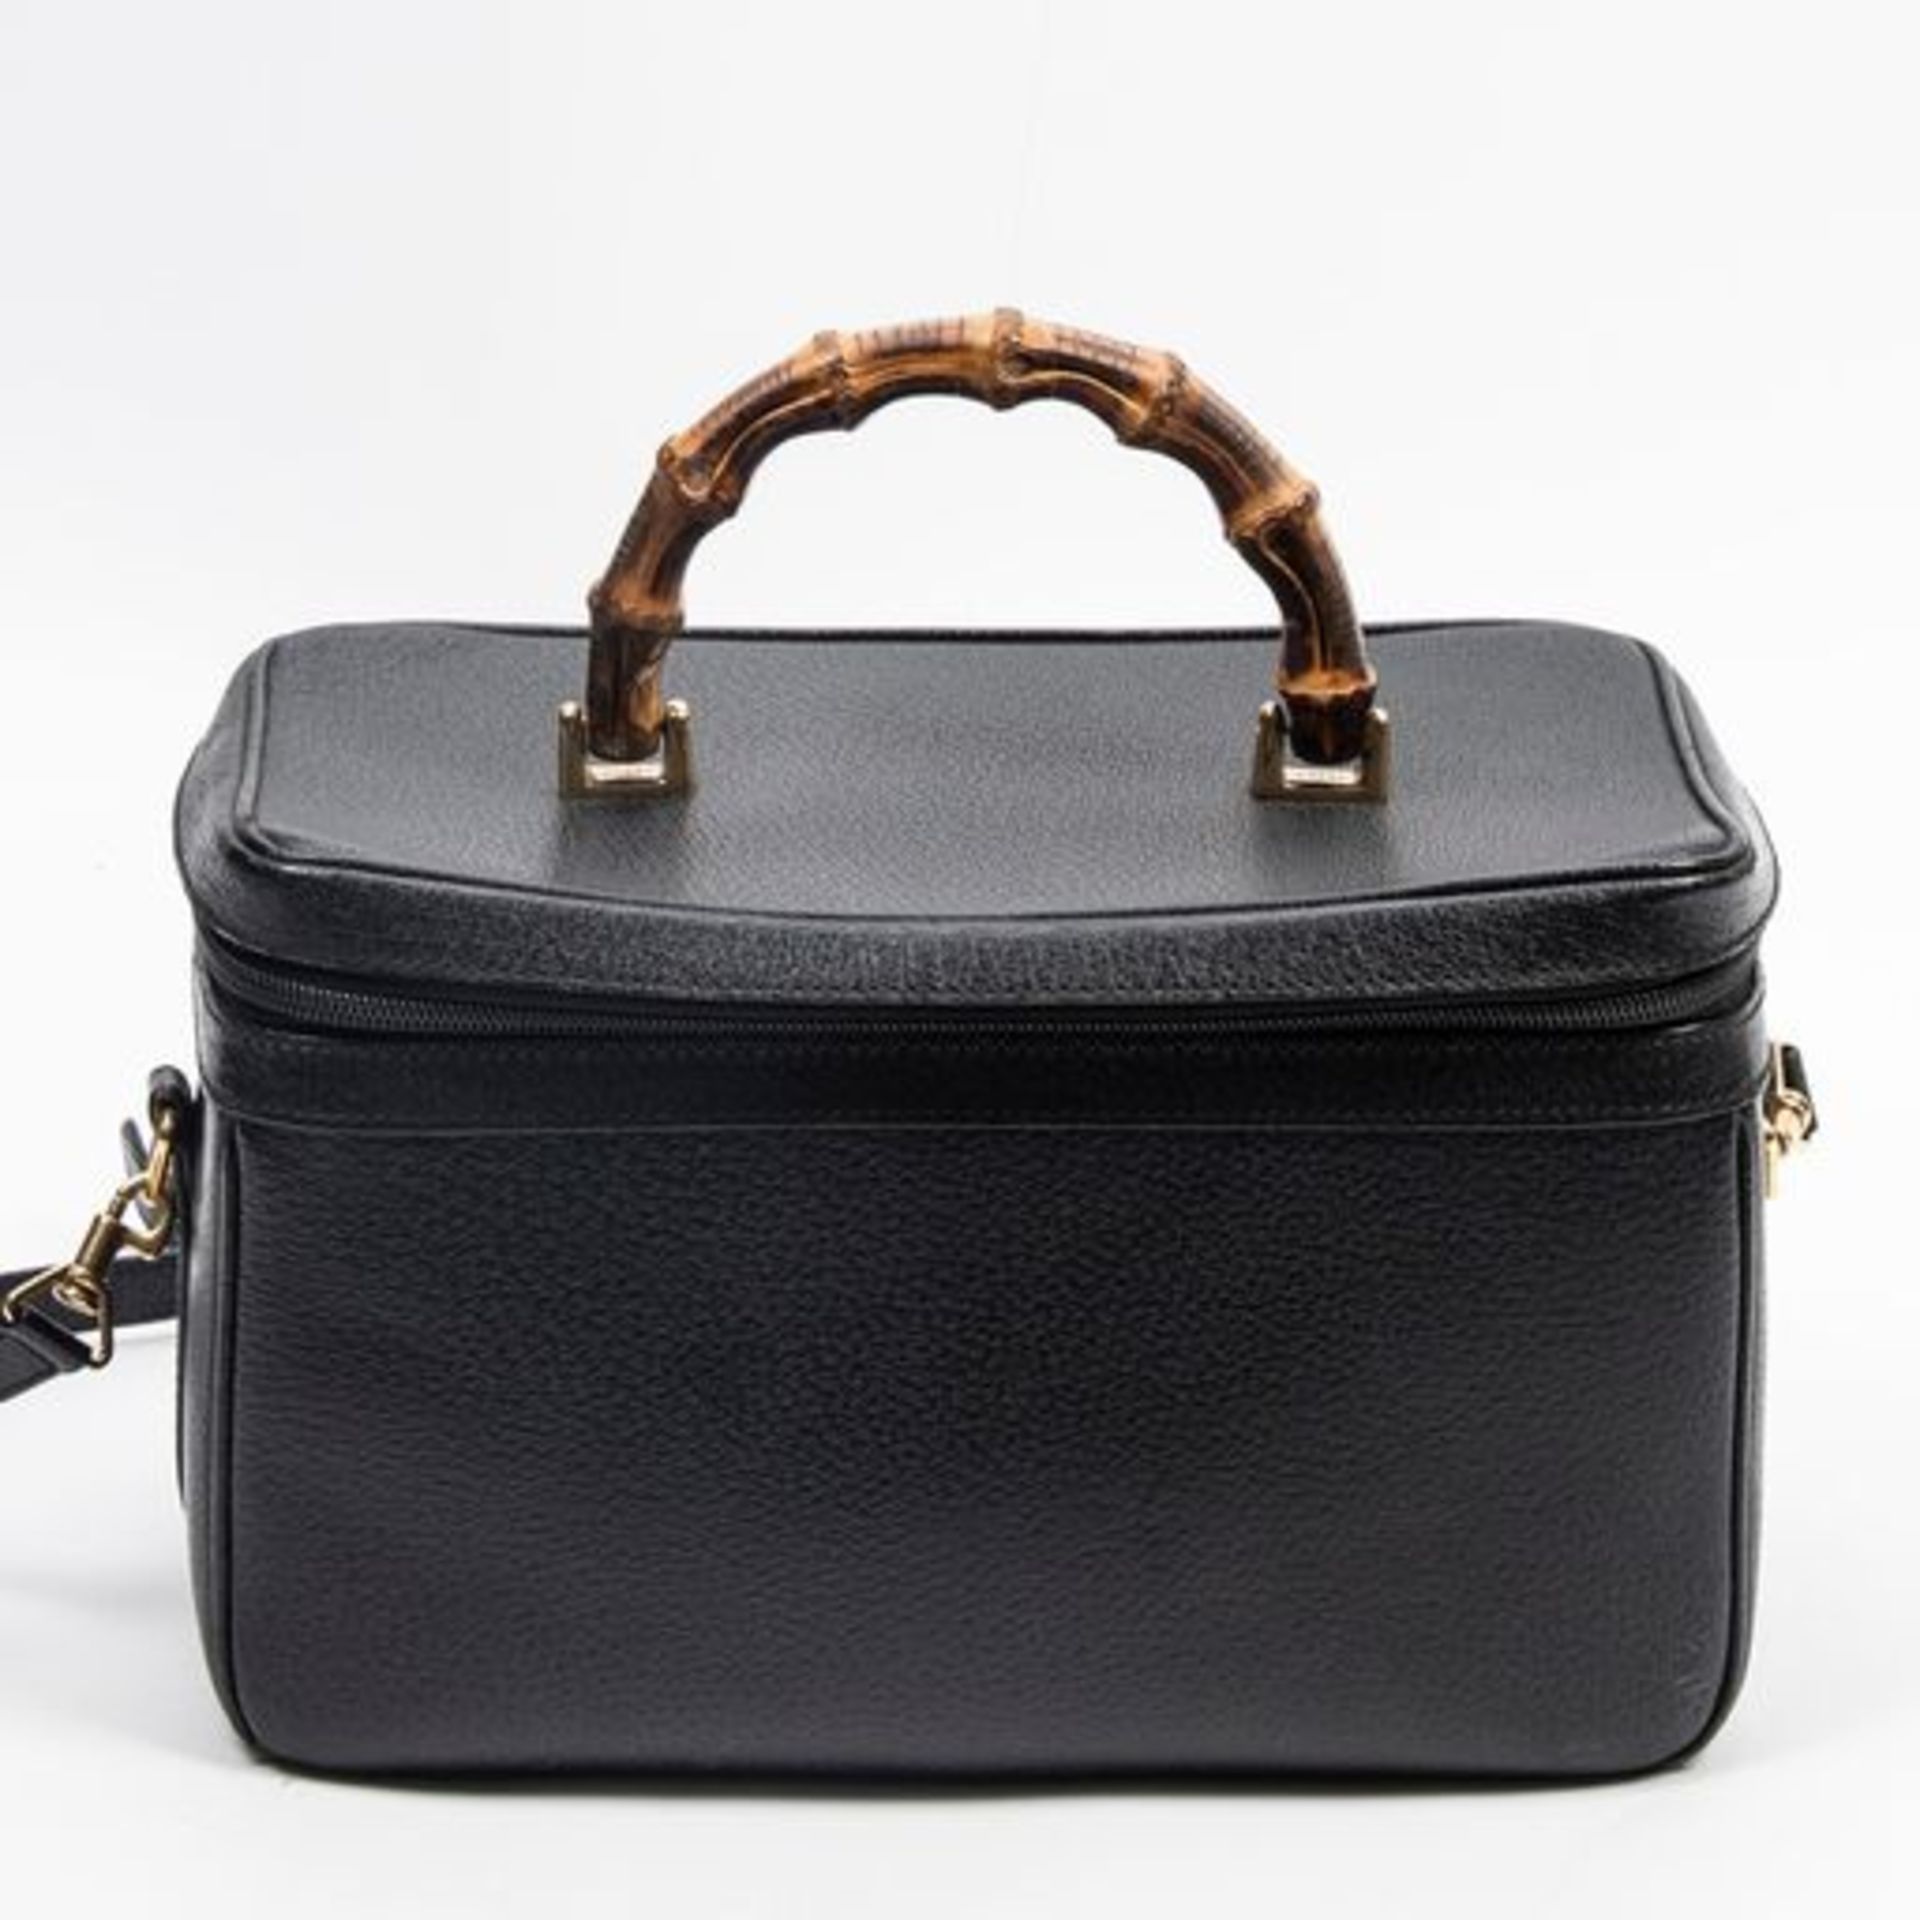 RRP £1125 Gucci Bamboo Vanity Shoulder Bag Black - AAR9977 - Grade A - (Bags Are Not On Site, Please